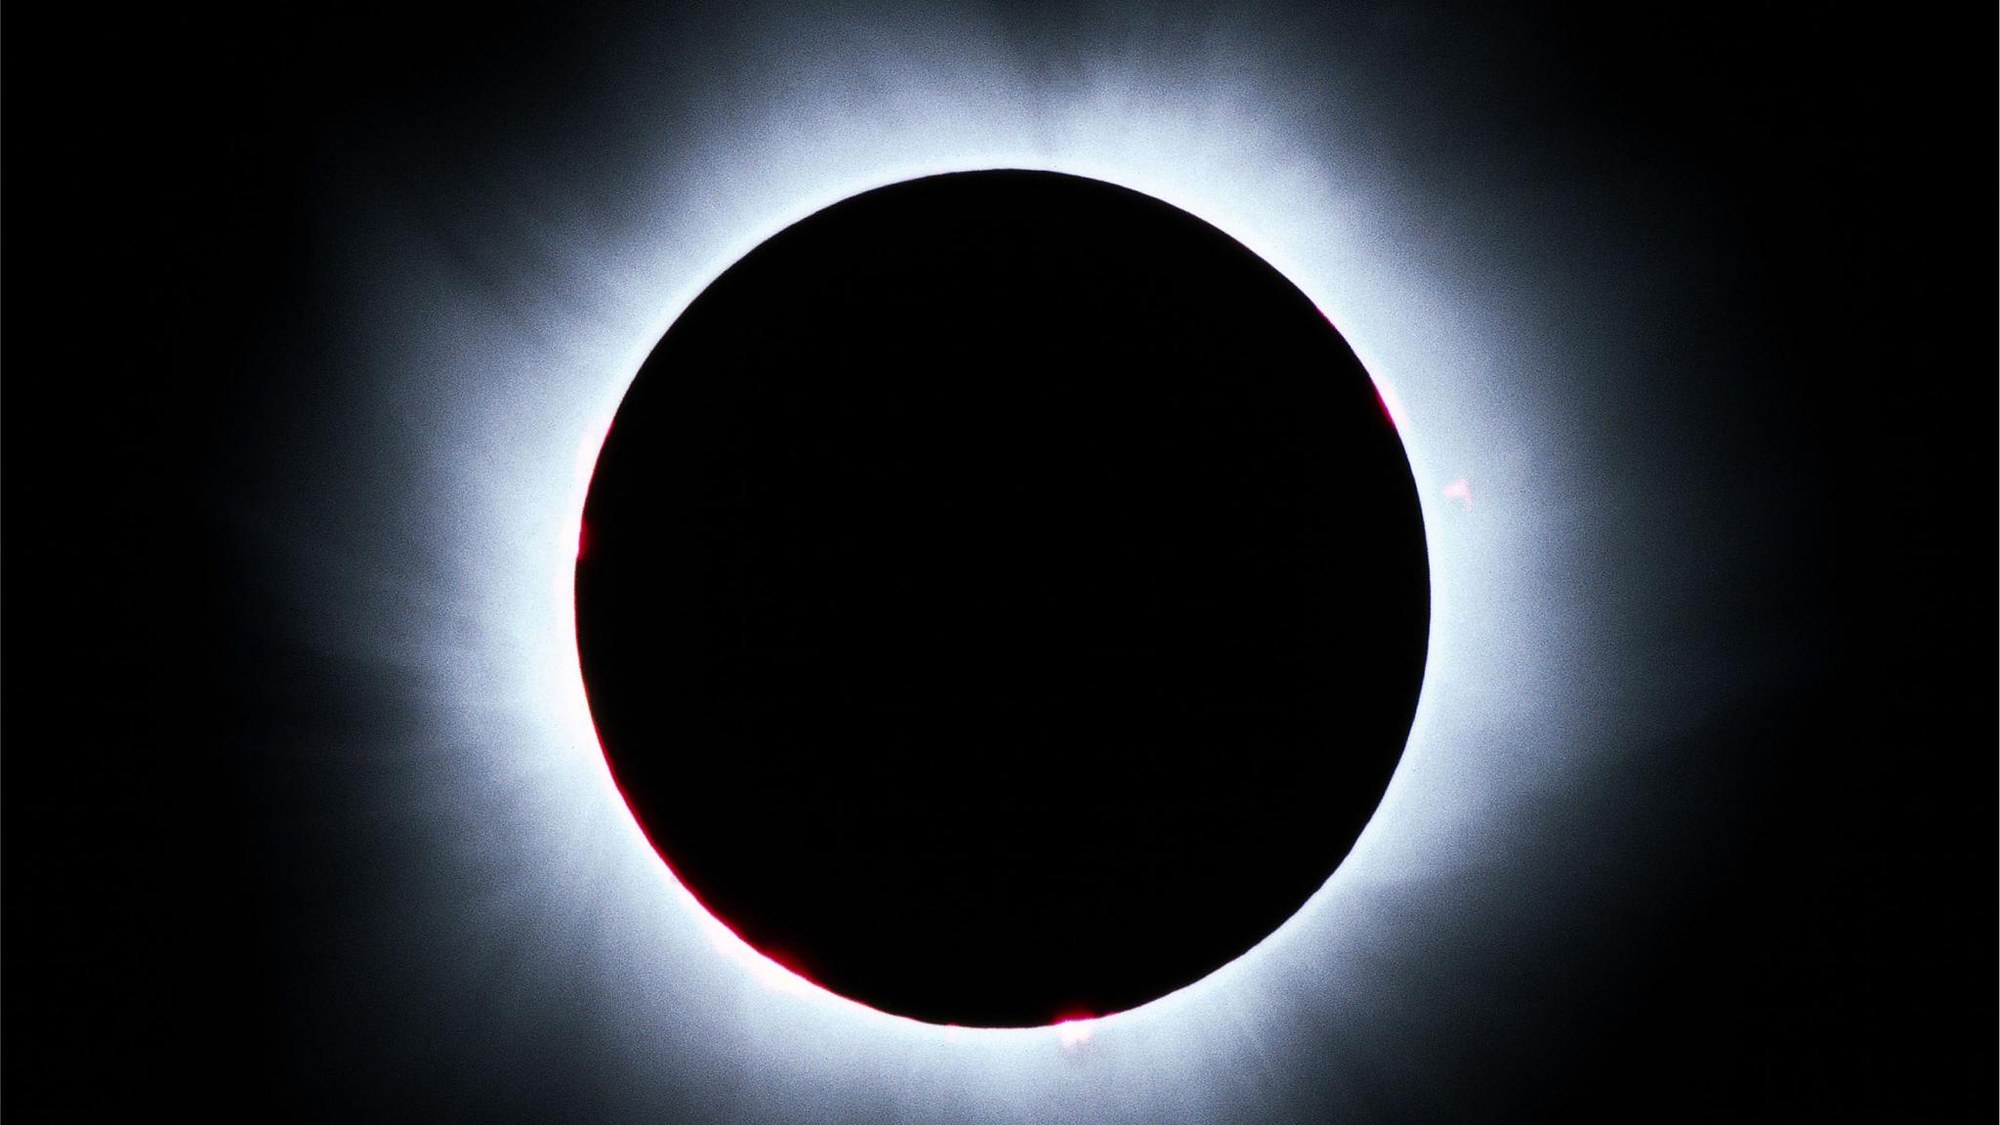 The magical moment of totality – the solar corona becomes visible